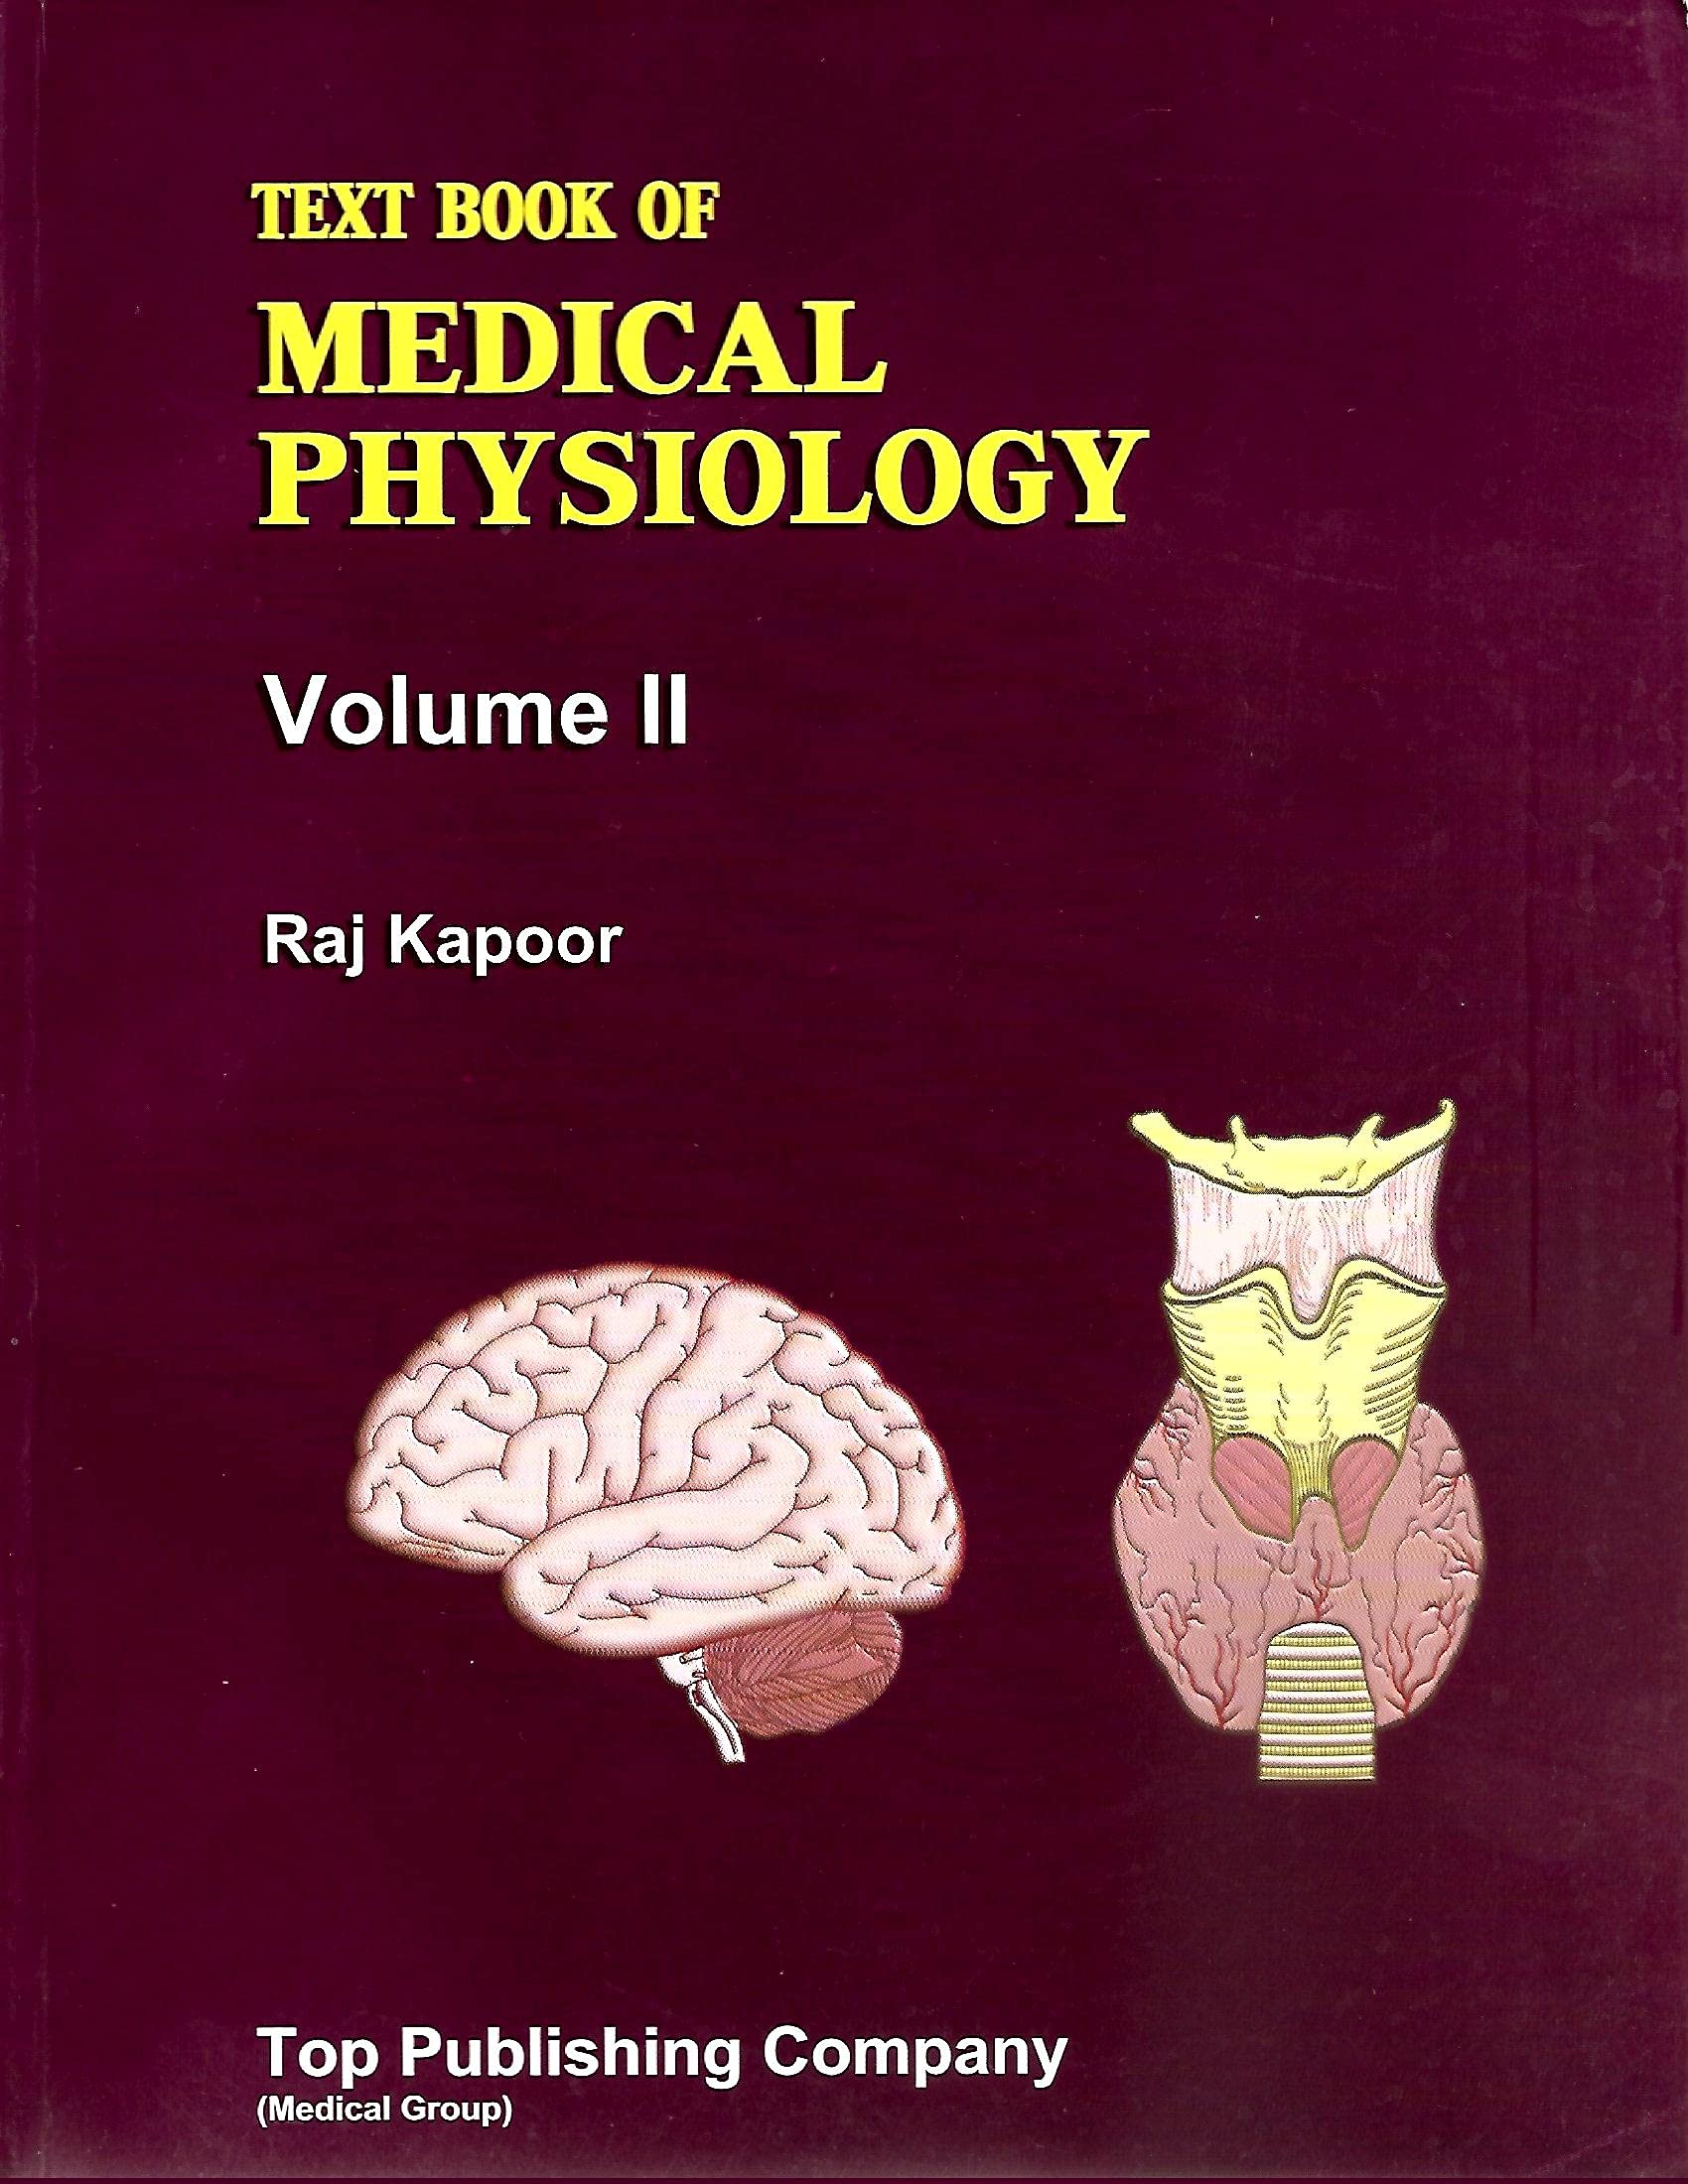 Latest Edition Text books of Medical physiology vol.2